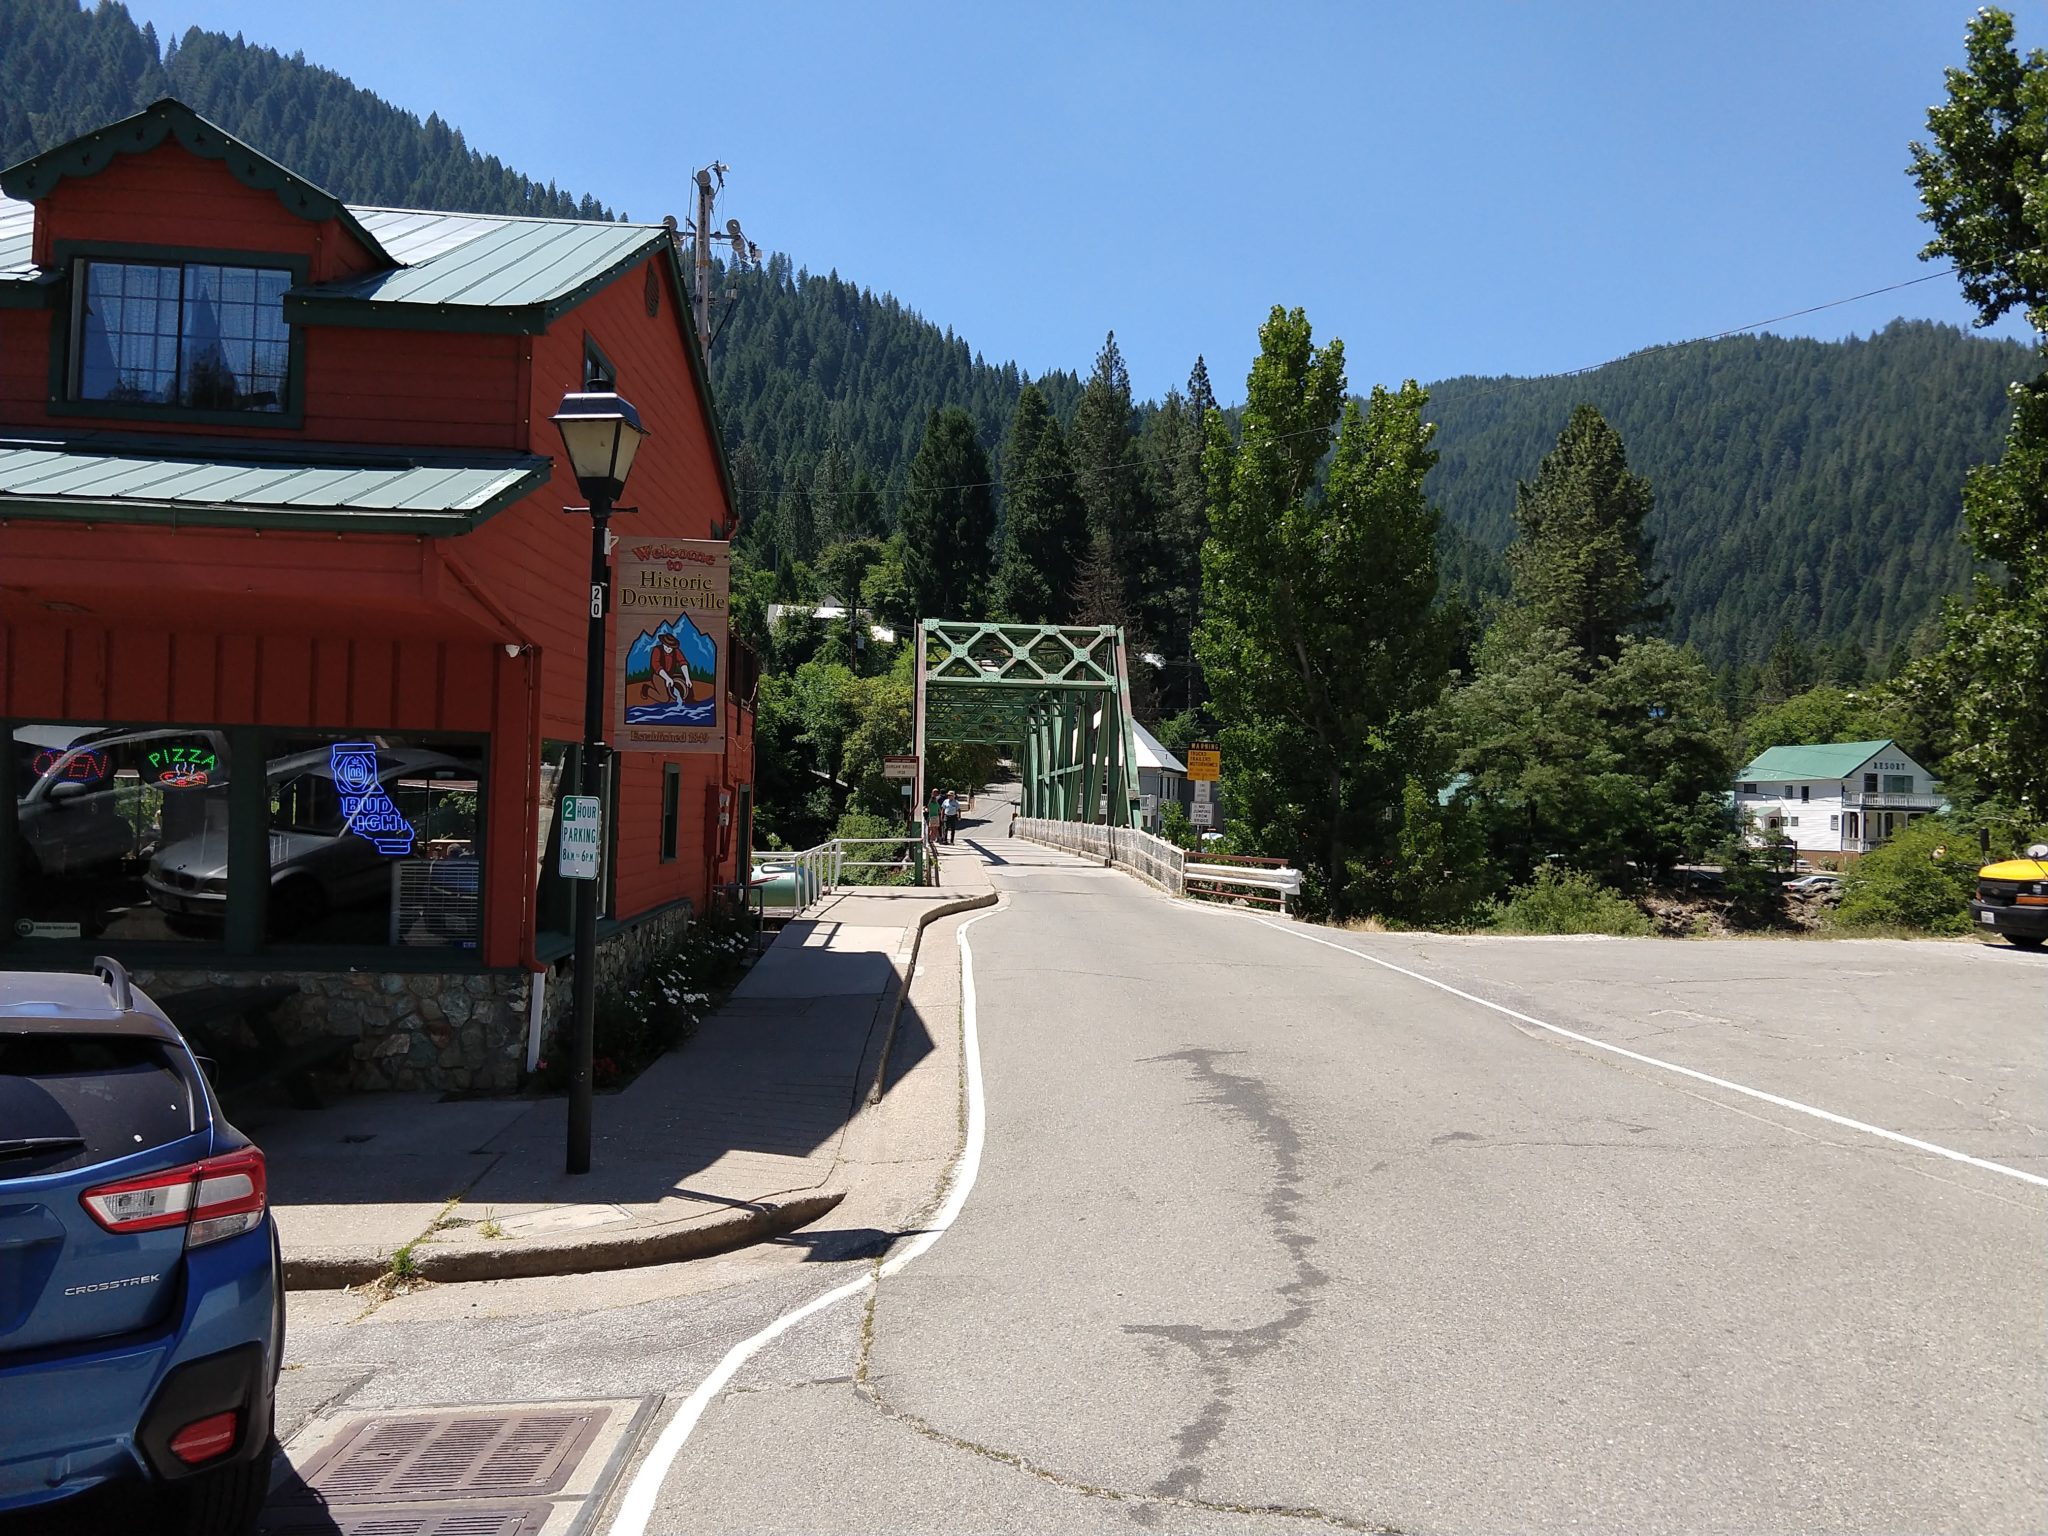 Downieville Downhill